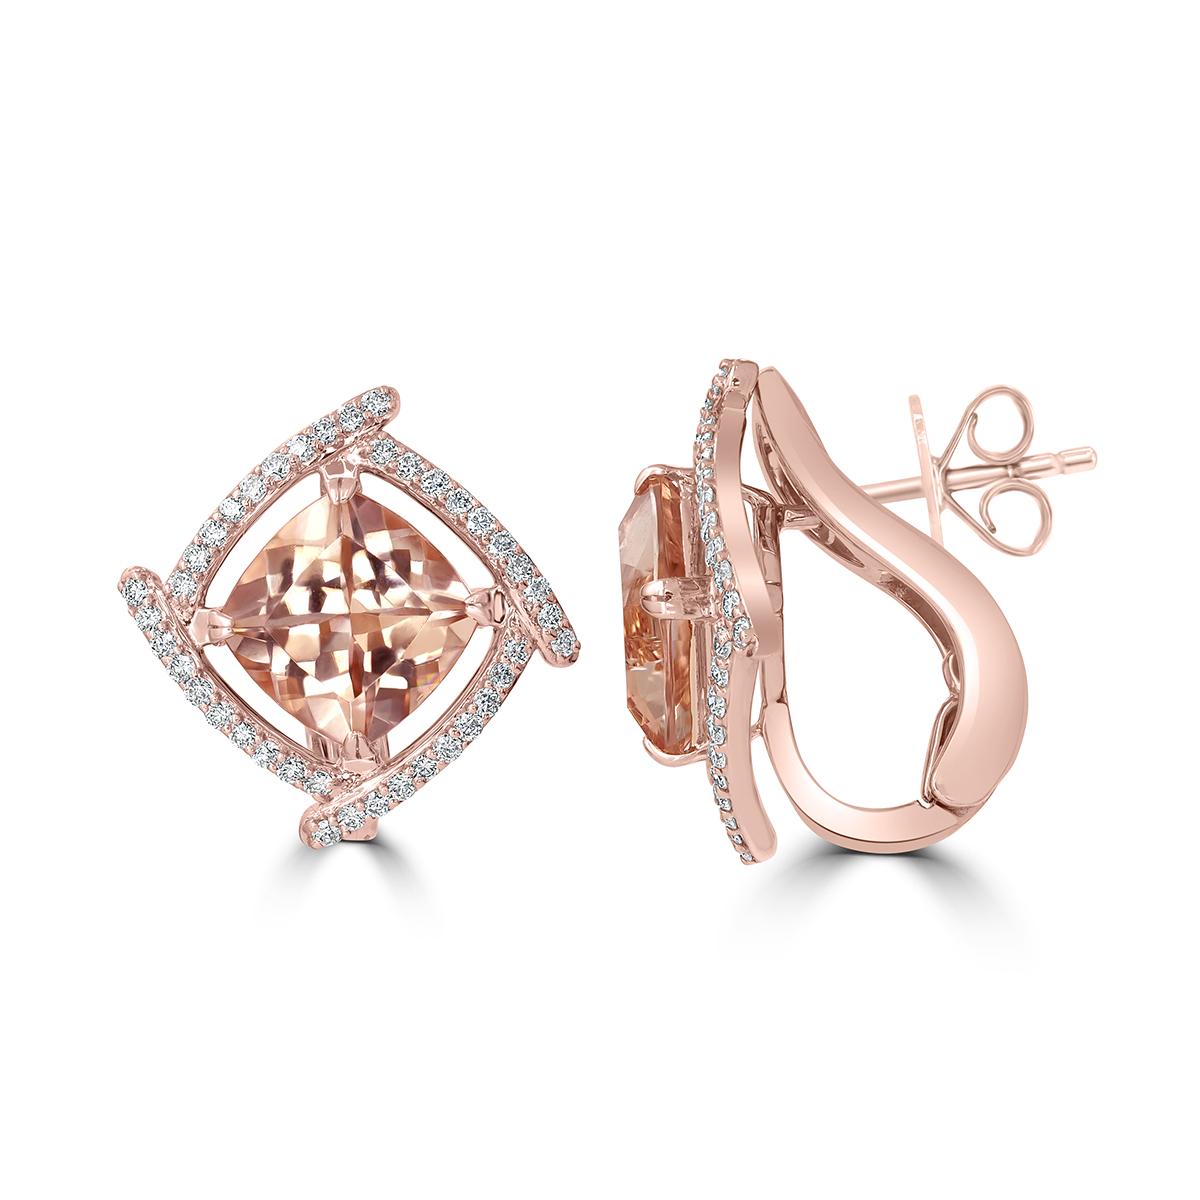 This Beautiful Stud Earring Crafted In 14K Rose Gold Featuring 8mm Cushion Shaped Morganite Gemstones With Diamonds. Its Trendy Look is Perfect Fit for Outings and Day to Day wearing. 


Style# E4679MO
Morganite: Cushion 8mm 4.11cts
Diamonds: 80pcs